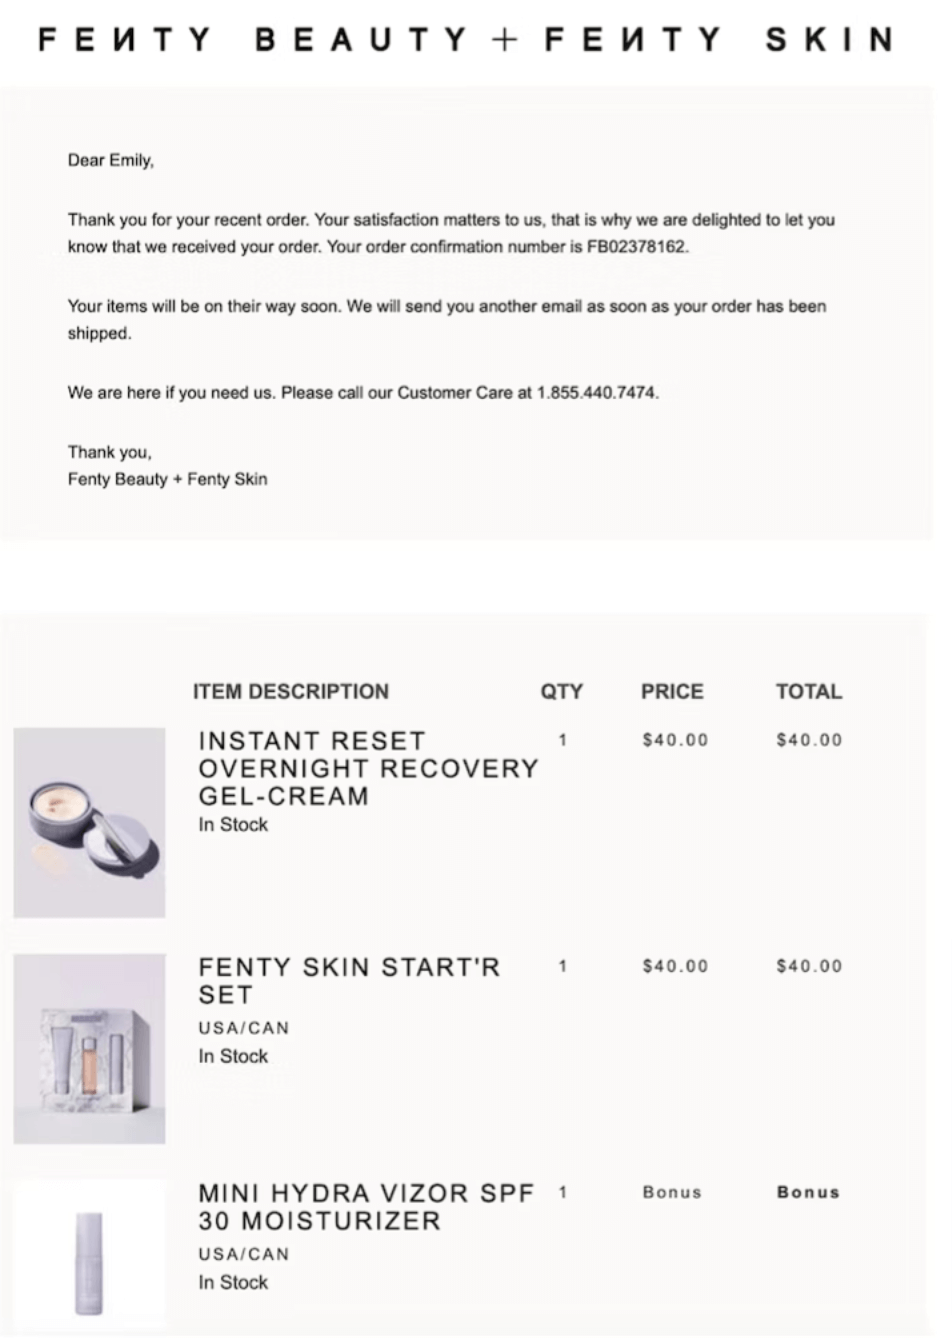 Image shows a post-purchase email from Fenty Skin